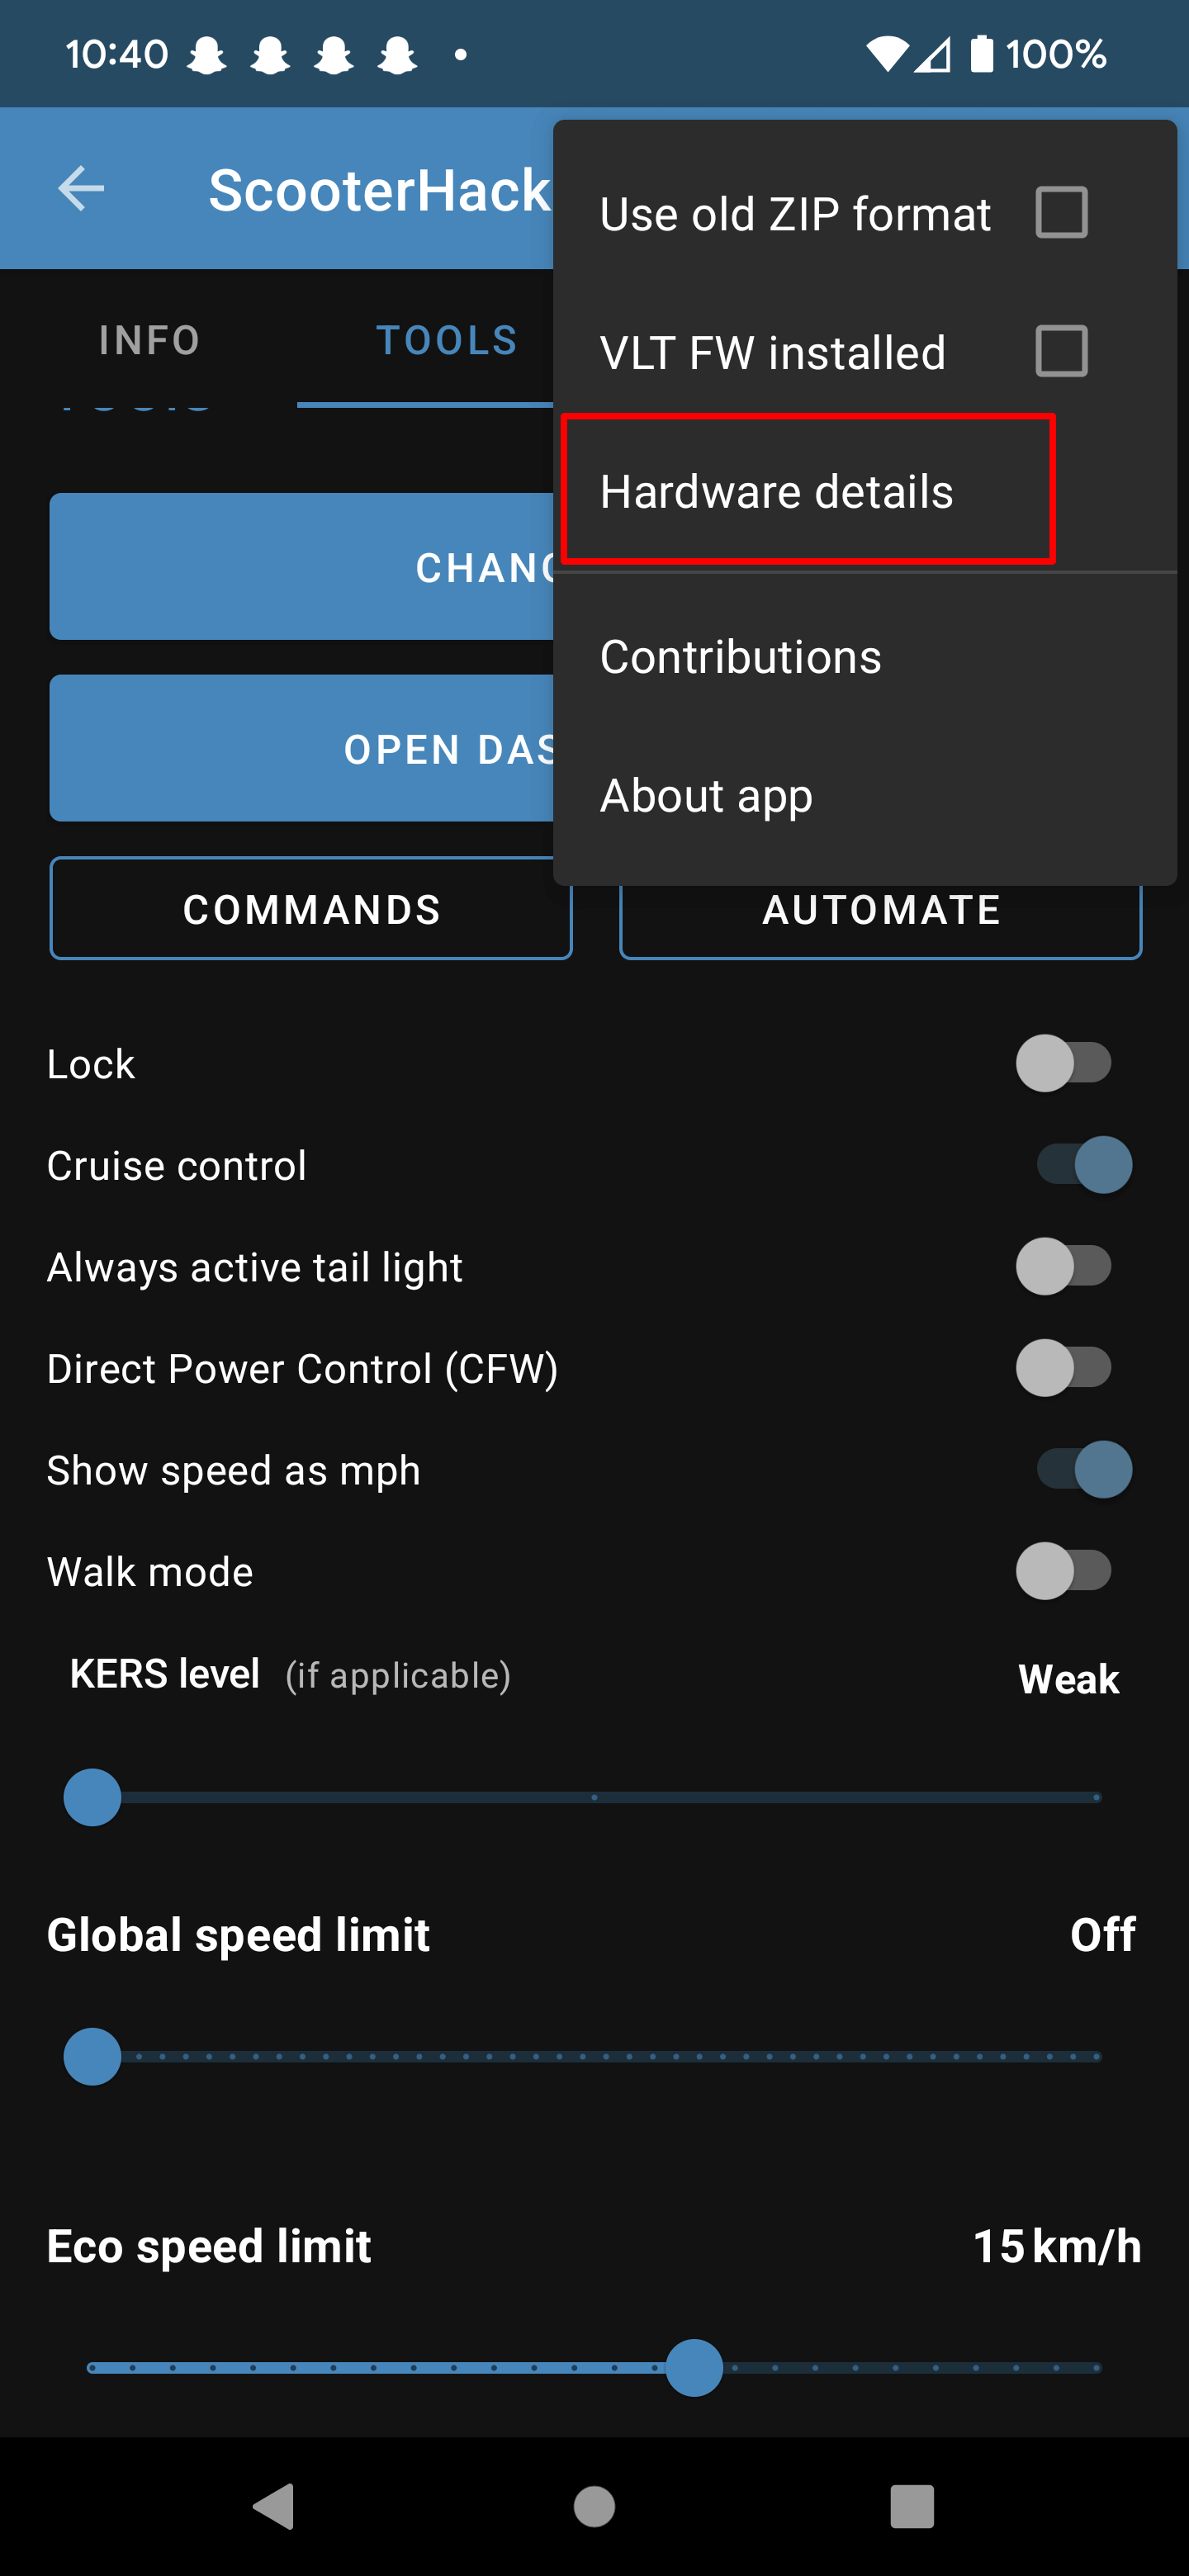 The hardware details menu in ScooterHacking Utility.